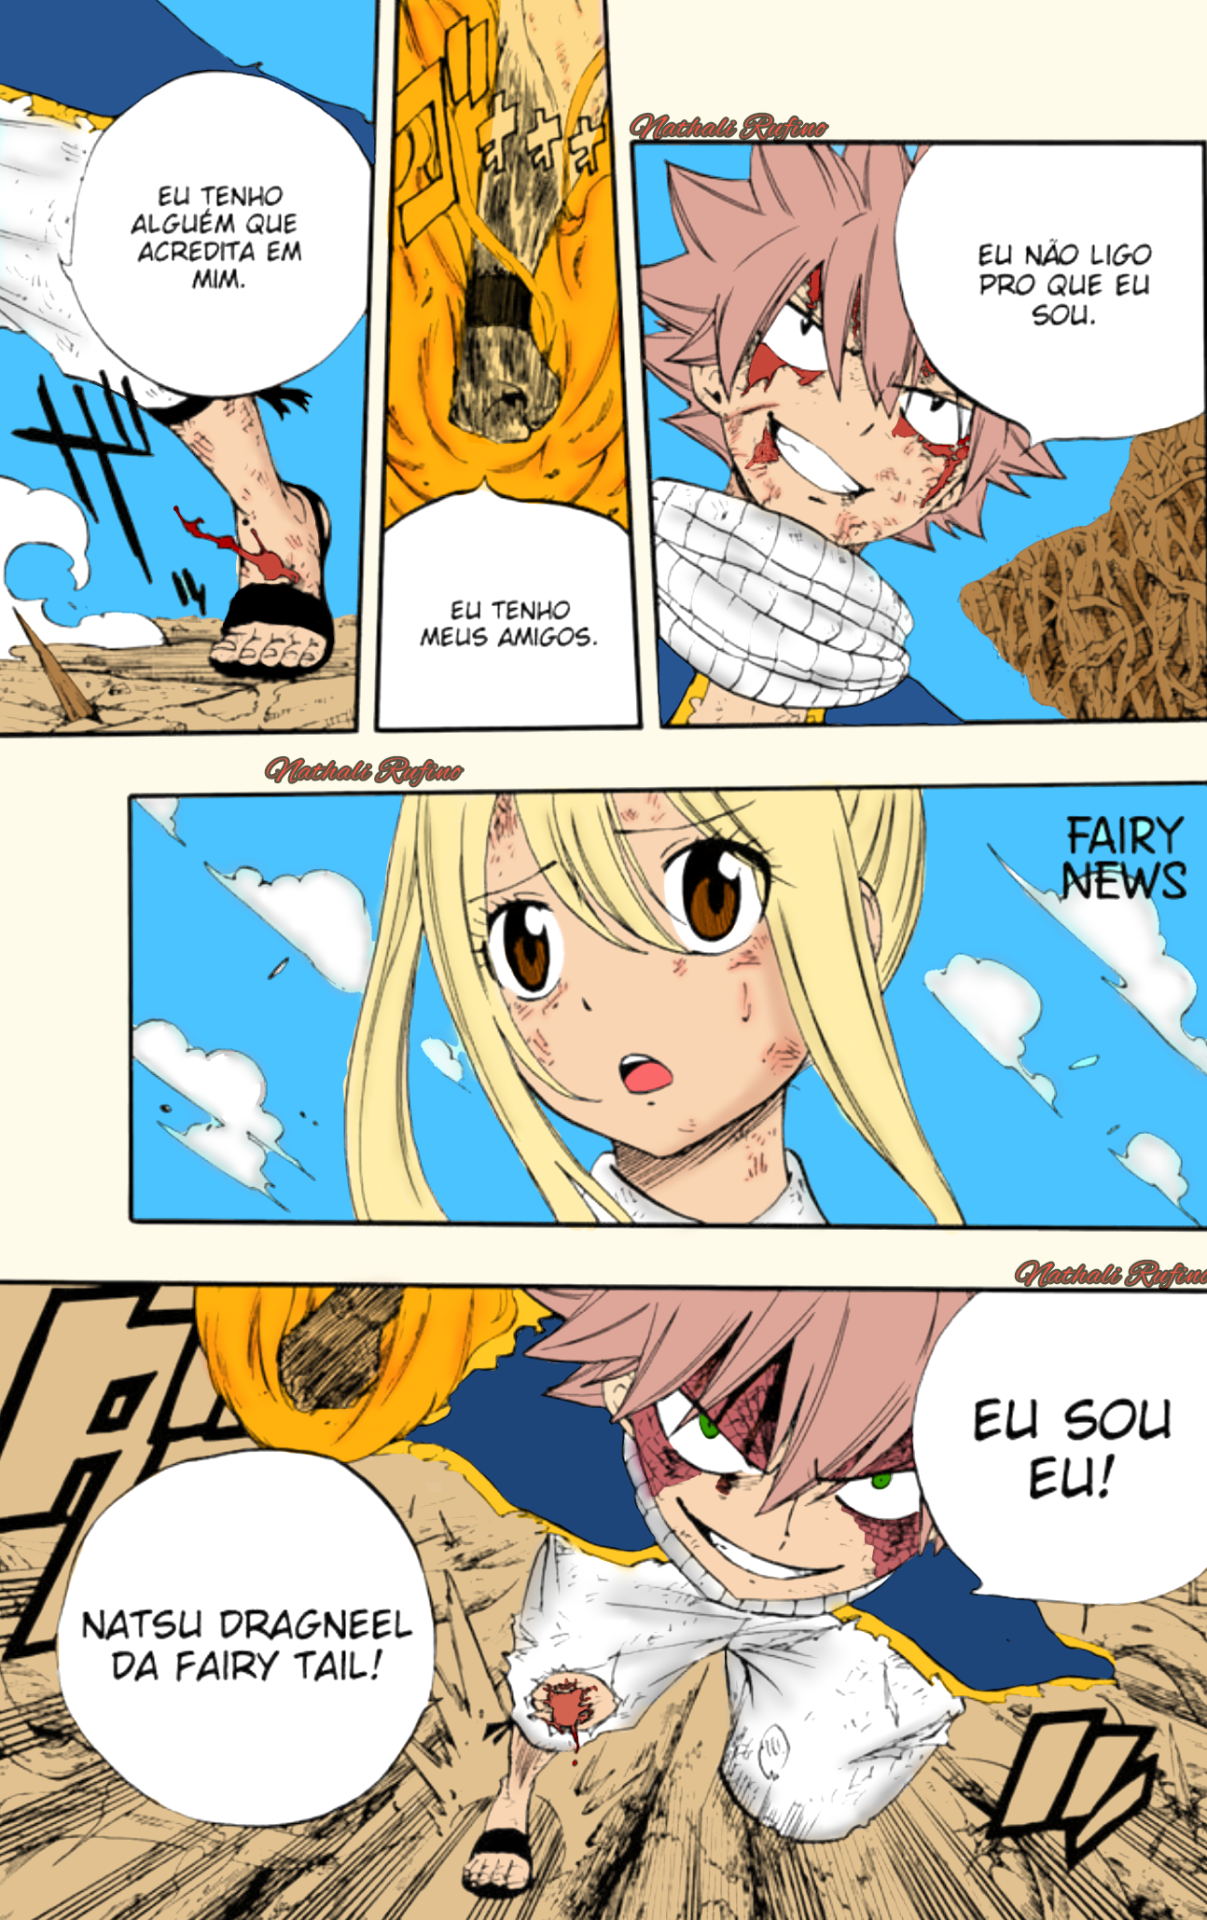 Nathali — Lucy heartfilia from Fairy tail 100 years quest...